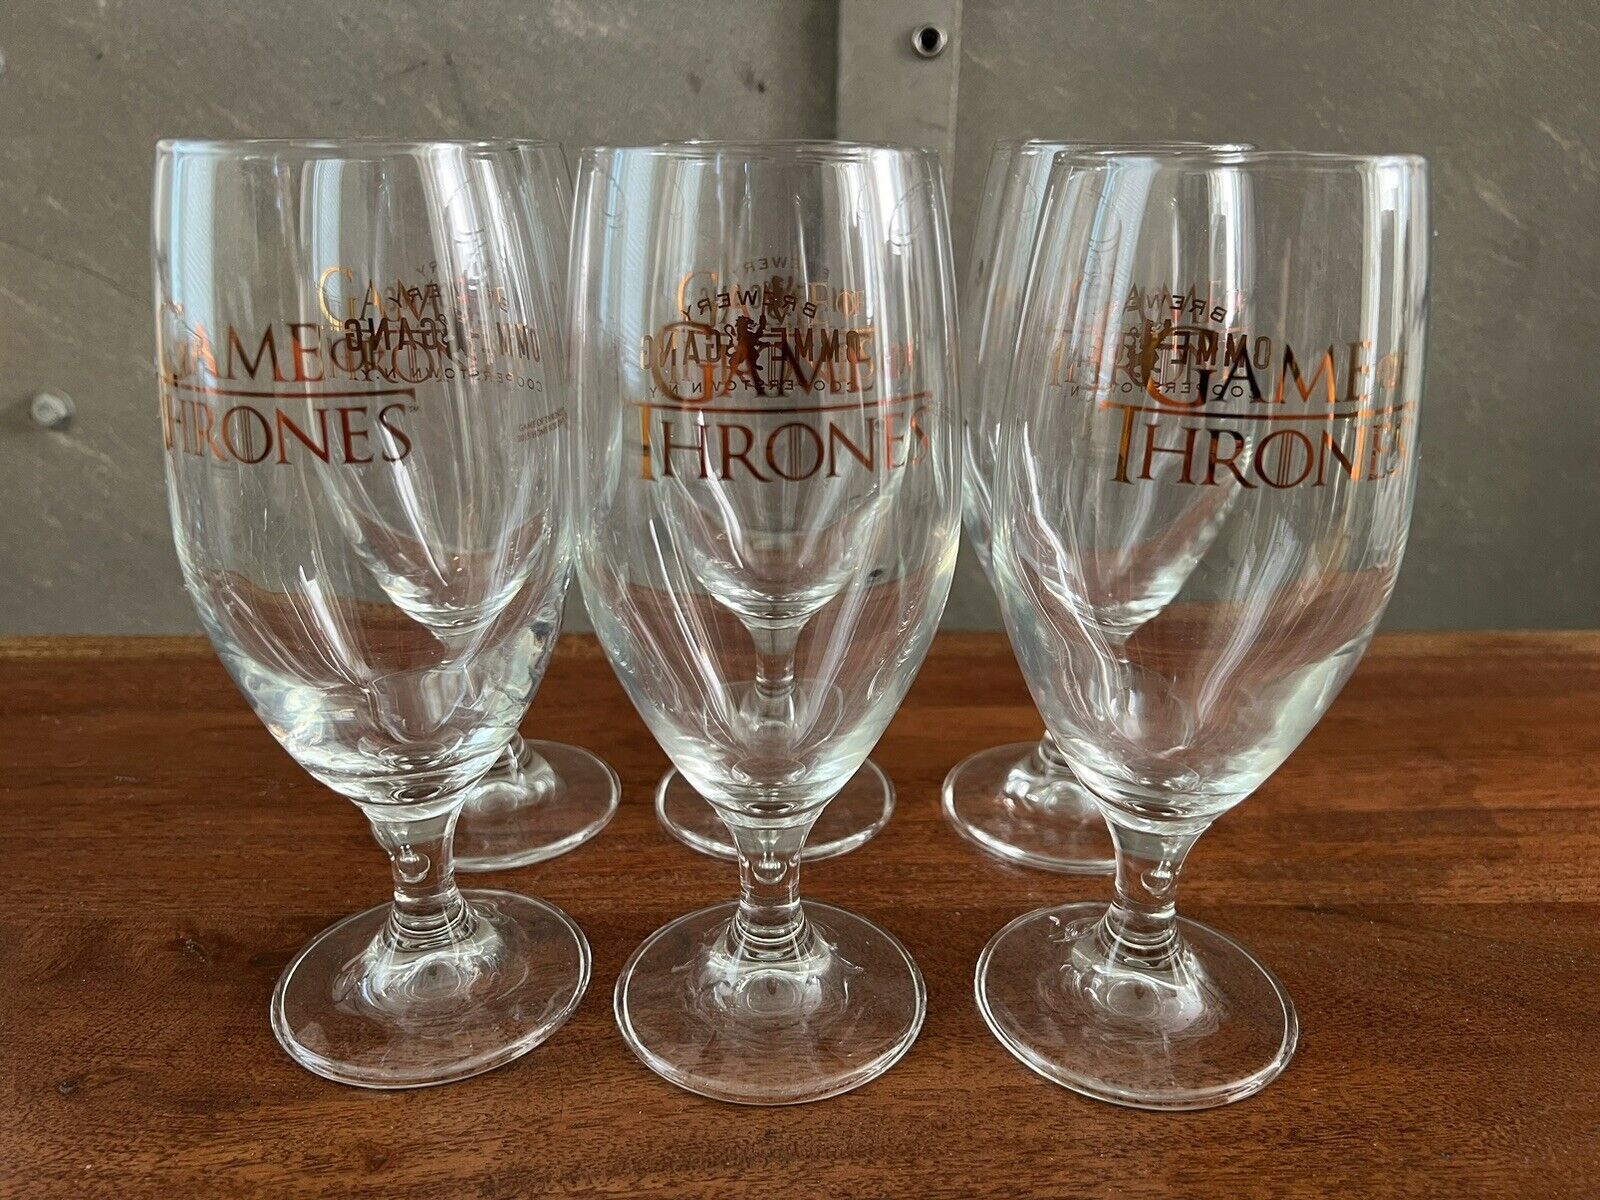 Game of Thrones Ommegang Beer Glasses Gold Logo Limited Edition Set of 6 - NIB